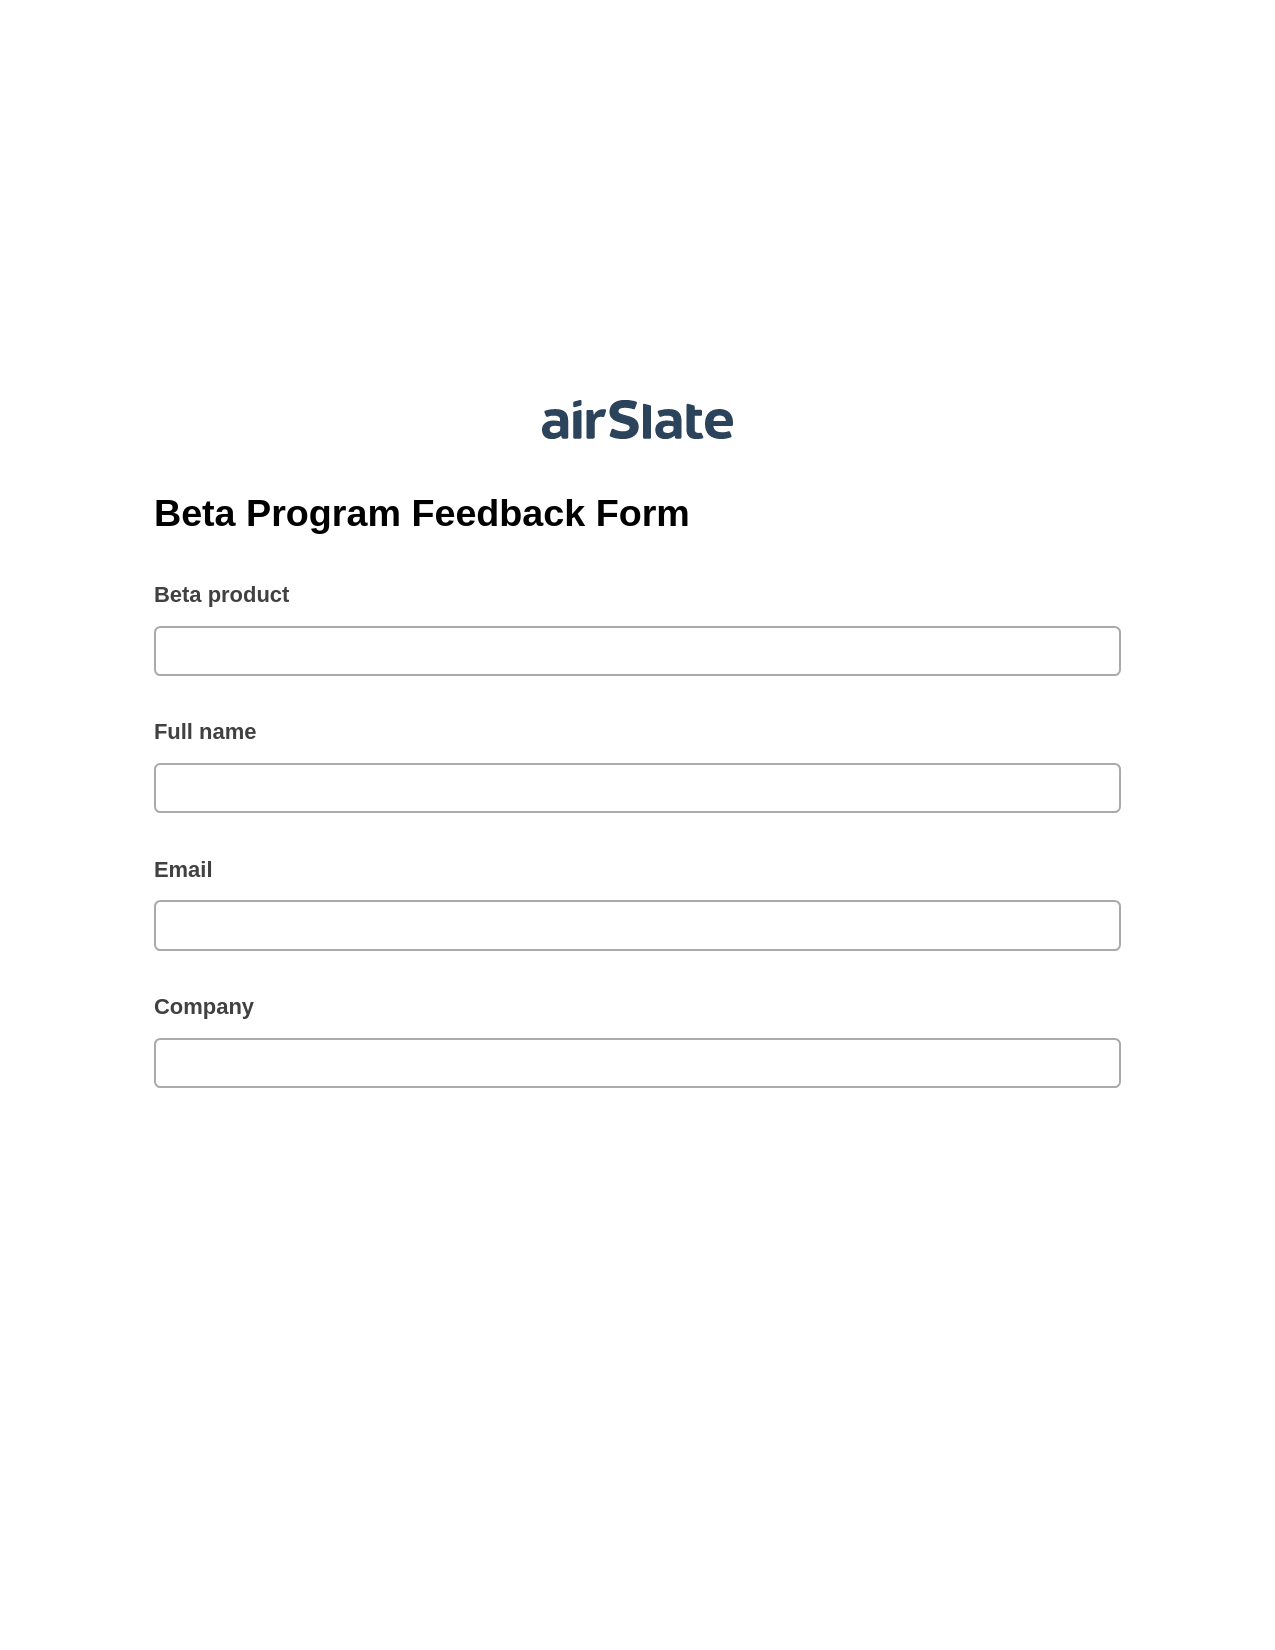 Beta Program Feedback Form Pre-fill from CSV File Bot, Assign Roles to Recipients Bot, Export to Smartsheet